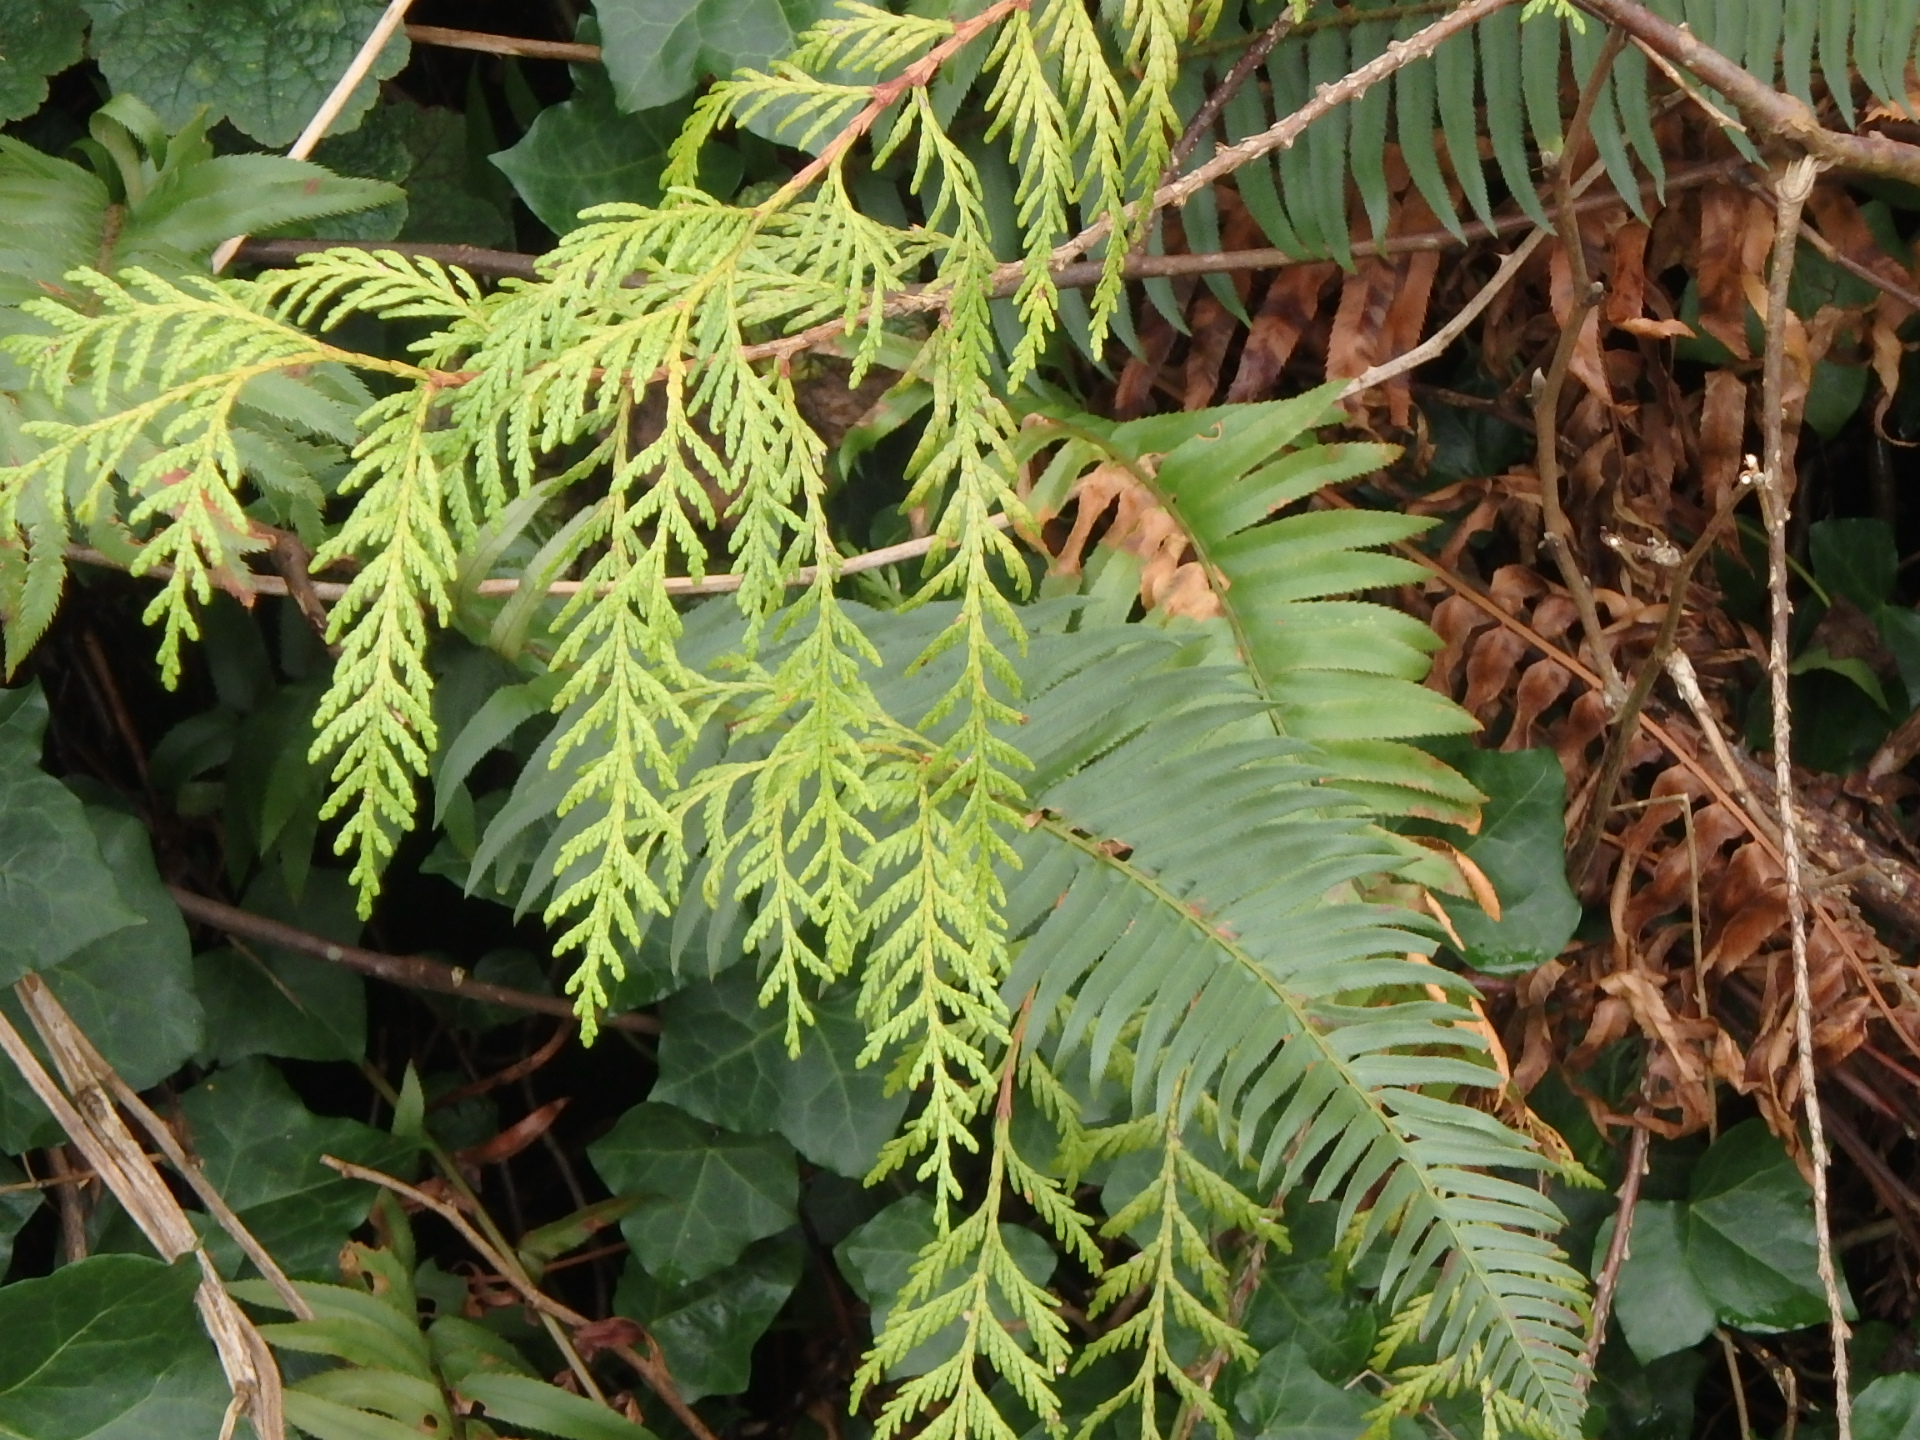 green leaves are shown against the backdrop of foliage